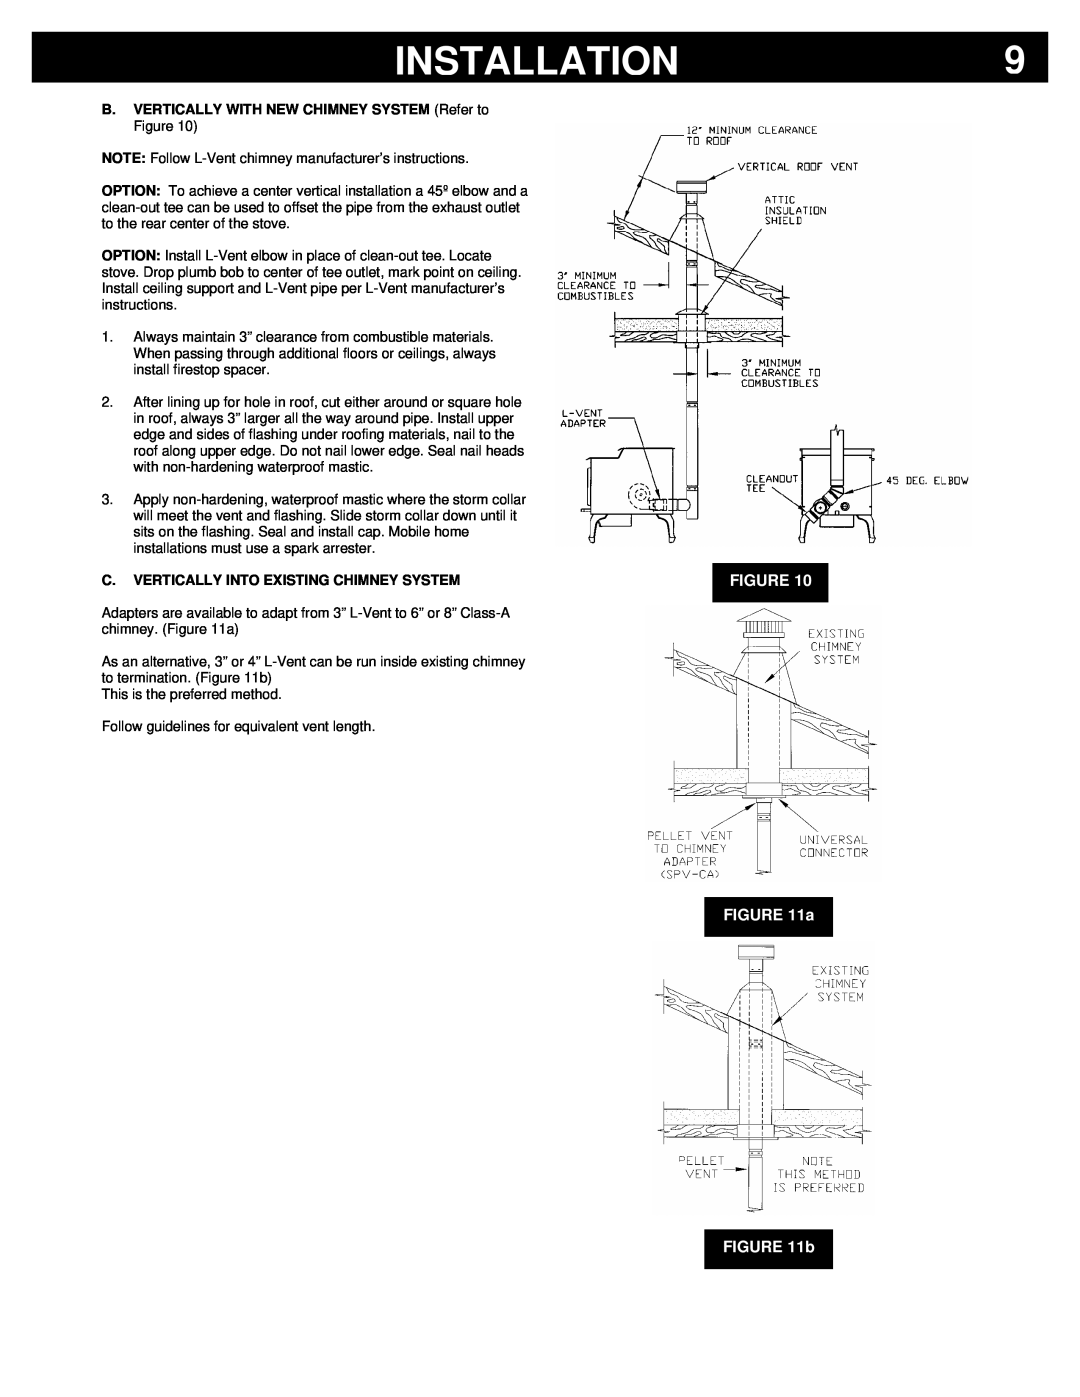 Breckwell P23I, P23FSA, P23FSL owner manual Installation, a b, C. Vertically Into Existing Chimney System 